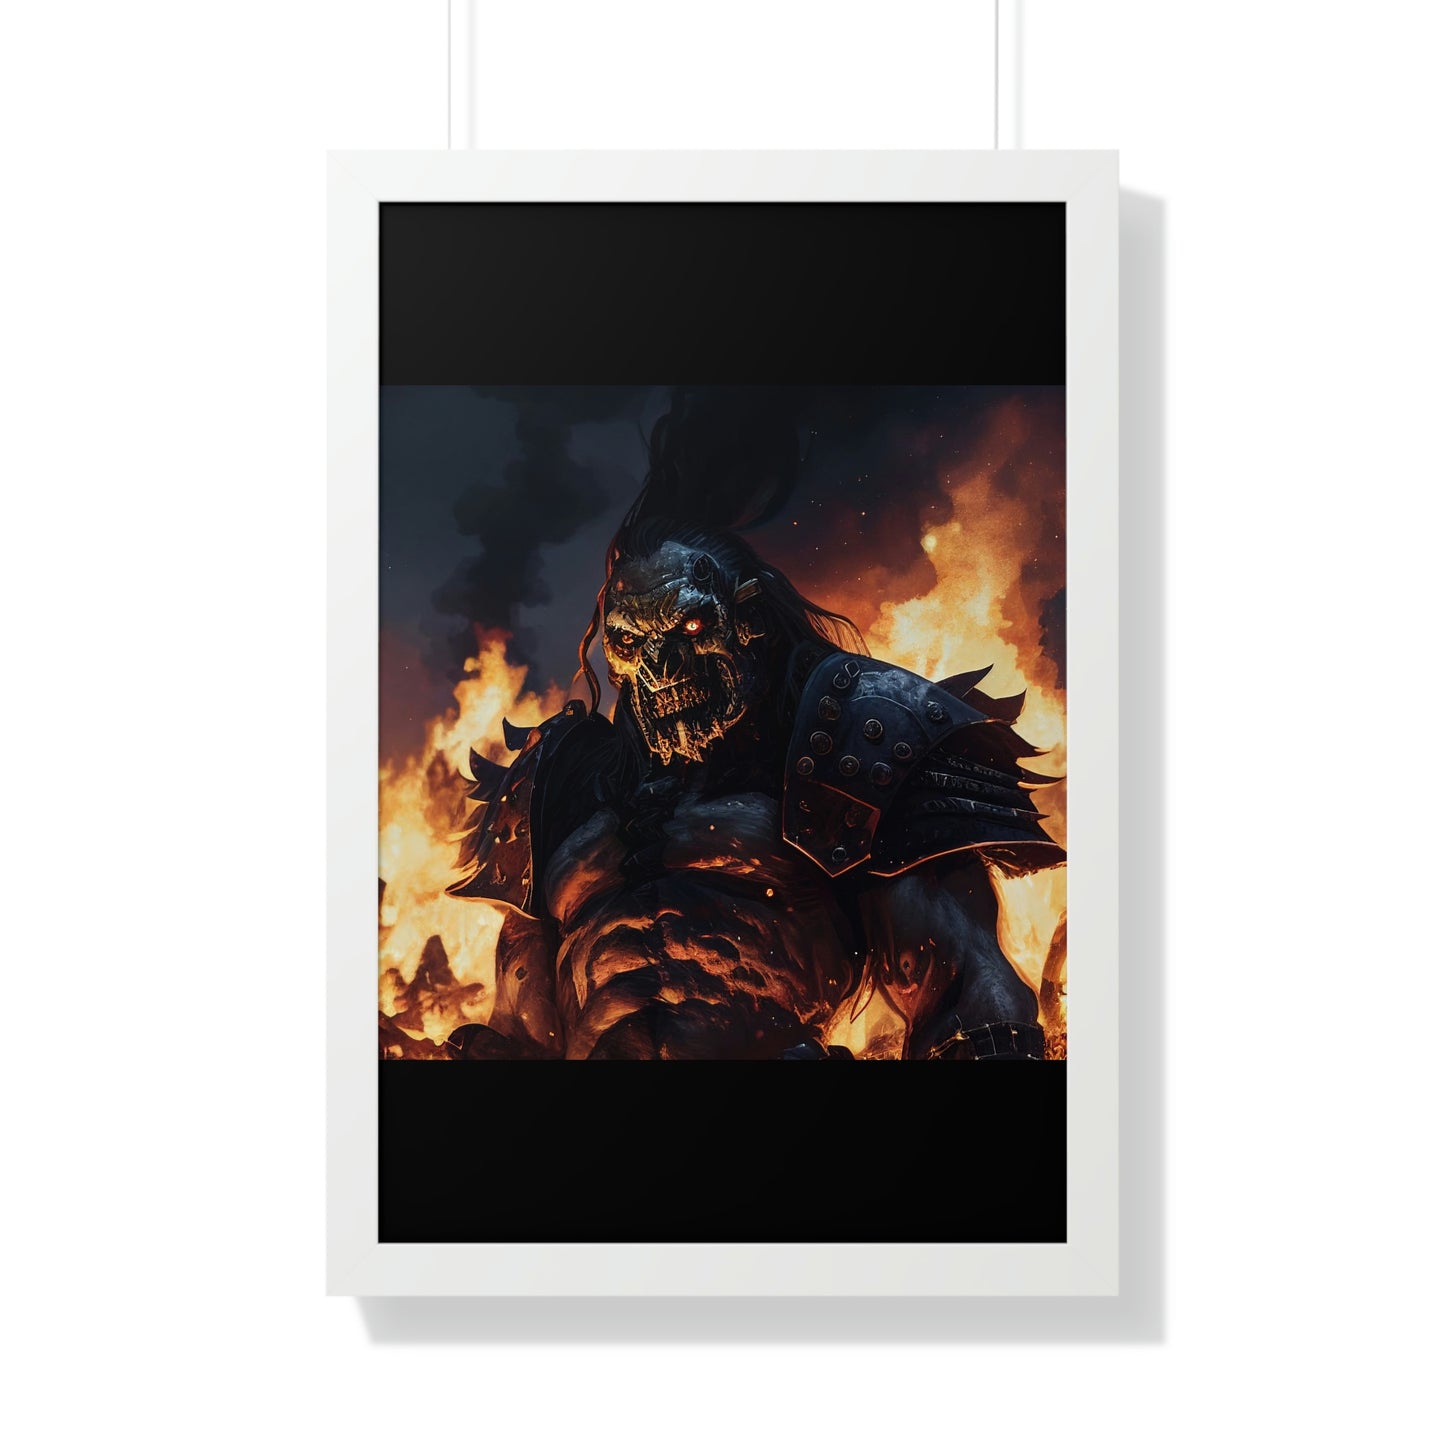 Burning Triumph: A Powerful Orc Warrior Emerges Victorious from the Flames as He Strikes Fear in Those Fleeing the Battle Field